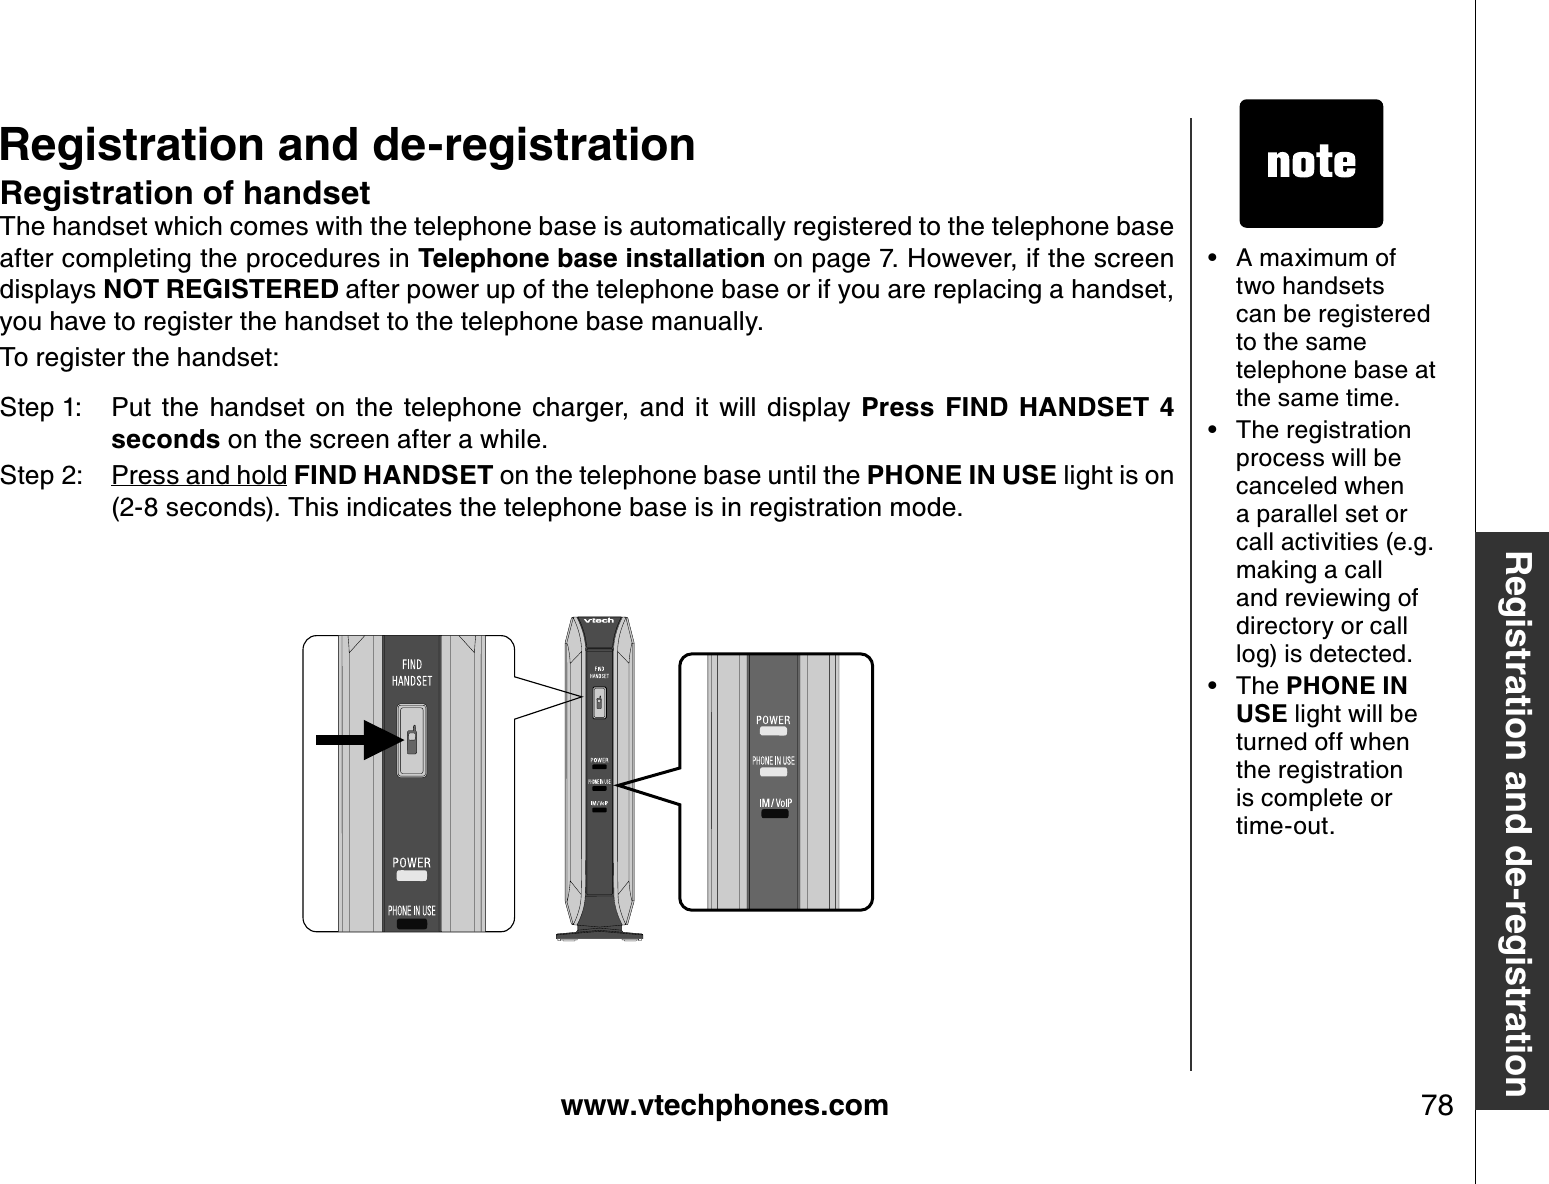 www.vtechphones.com 78Registration and de-registrationRegistration and de-registrationRegistration of handsetThe handset which comes with the telephone base is automatically registered to the telephone base after completing the procedures in Telephone base installation on page 7. However, if the screen displays NOT REGISTERED after power up of the telephone base or if you are replacing a handset, you have to register the handset to the telephone base manually. To register the handset:Step 1: Put  the  handset  on  the  telephone  charger,  and  it  will  display  Press  FIND  HANDSET  4 seconds on the screen after a while. Step 2: Press and hold FIND HANDSET on the telephone base until the PHONE IN USE light is on (2-8 seconds). This indicates the telephone base is in registration mode.A maximum of two handsets can be registered to the same telephone base at the same time.The registration process will be canceled when a parallel set or call activities (e.g. making a call and reviewing of directory or call log) is detected.The PHONE IN USE light will be turned off when the registration is complete or time-out.•••